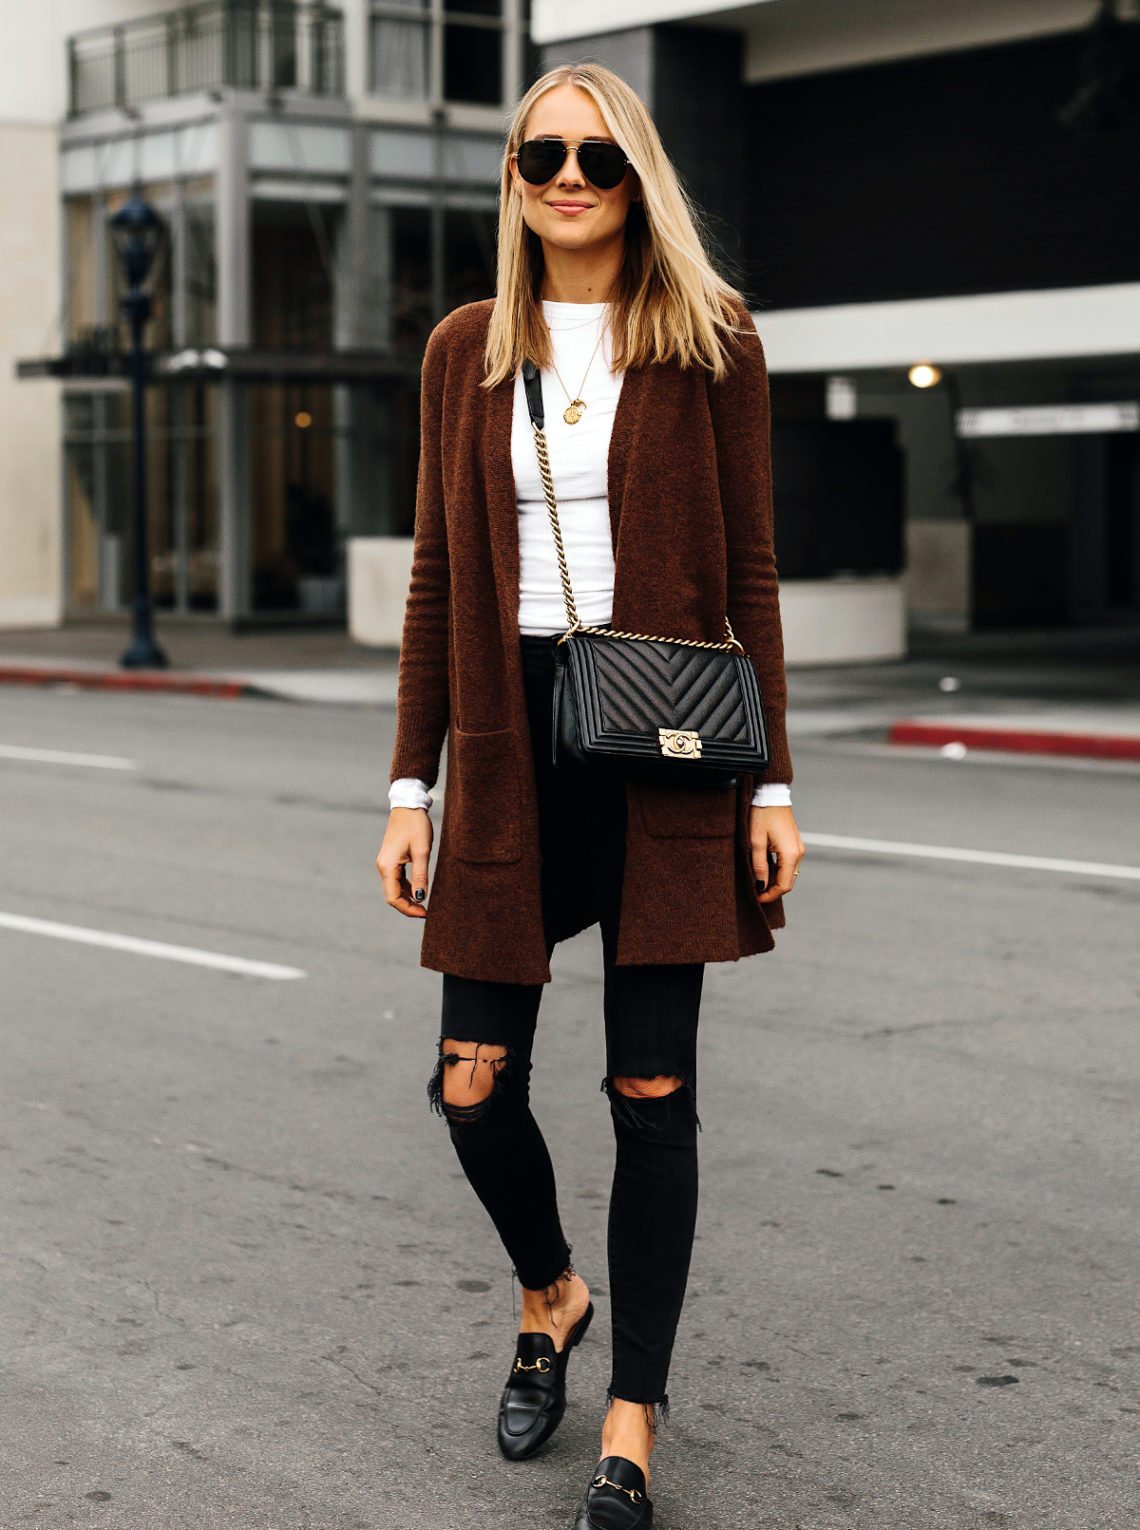 Blonde Woman Wearing Madewell Brown Long Cardigan White Top Madewell Black Ripped Skinny Jeans Gucci Black Princetown Loafer Mules Chanel Black Boy Bag Fashion Jackson San Diego Fashion Blogger Street Style